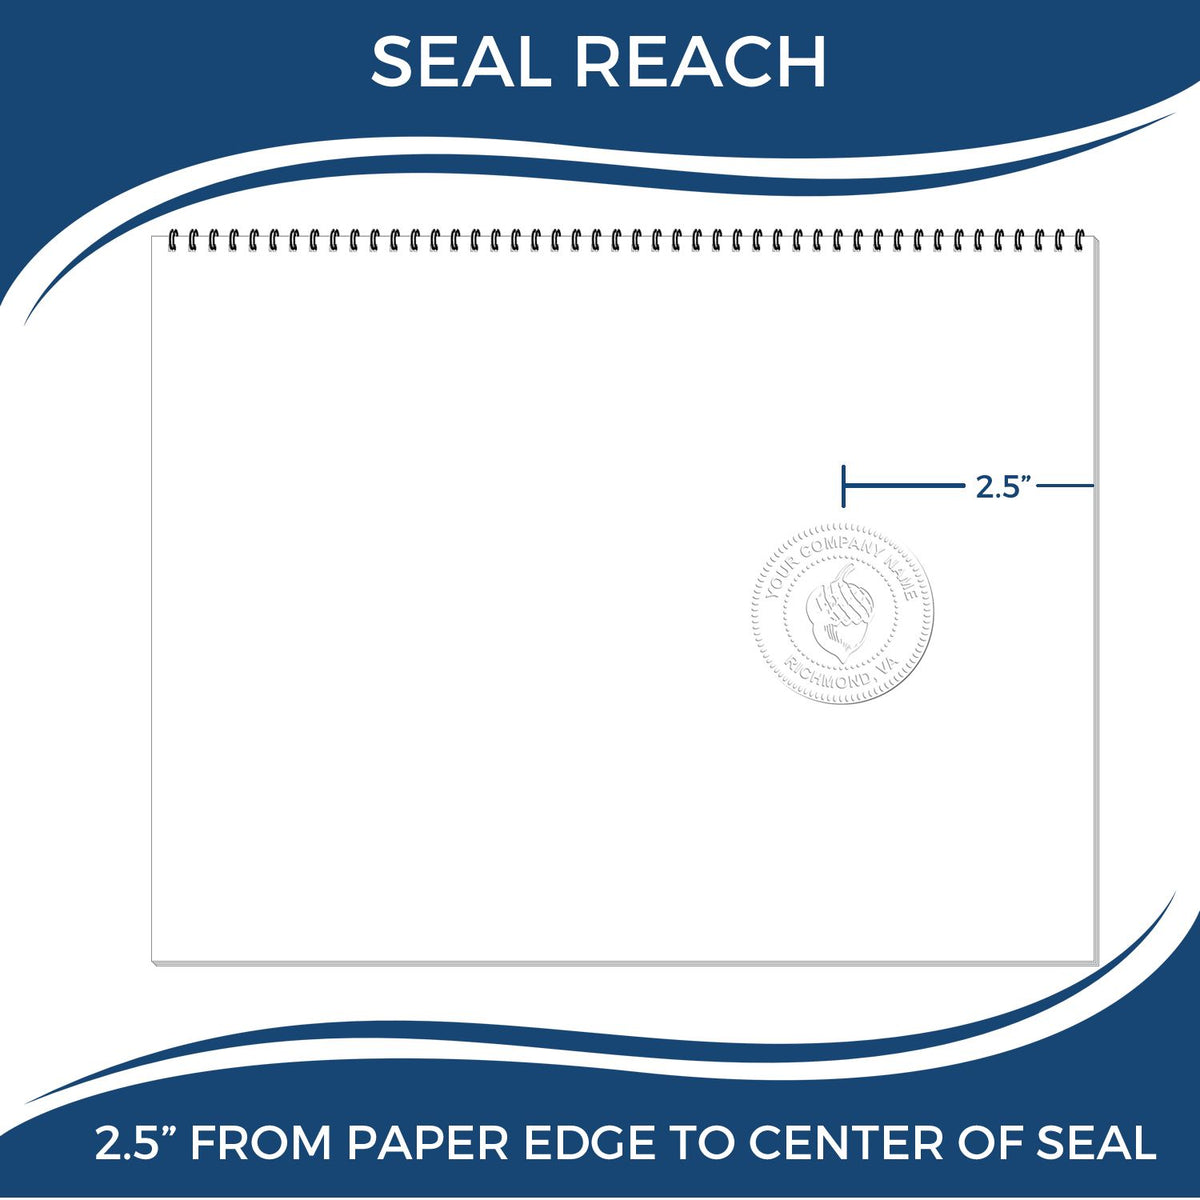 An infographic showing the seal reach which is represented by a ruler and a miniature seal image of the Heavy Duty Cast Iron Virginia Engineer Seal Embosser